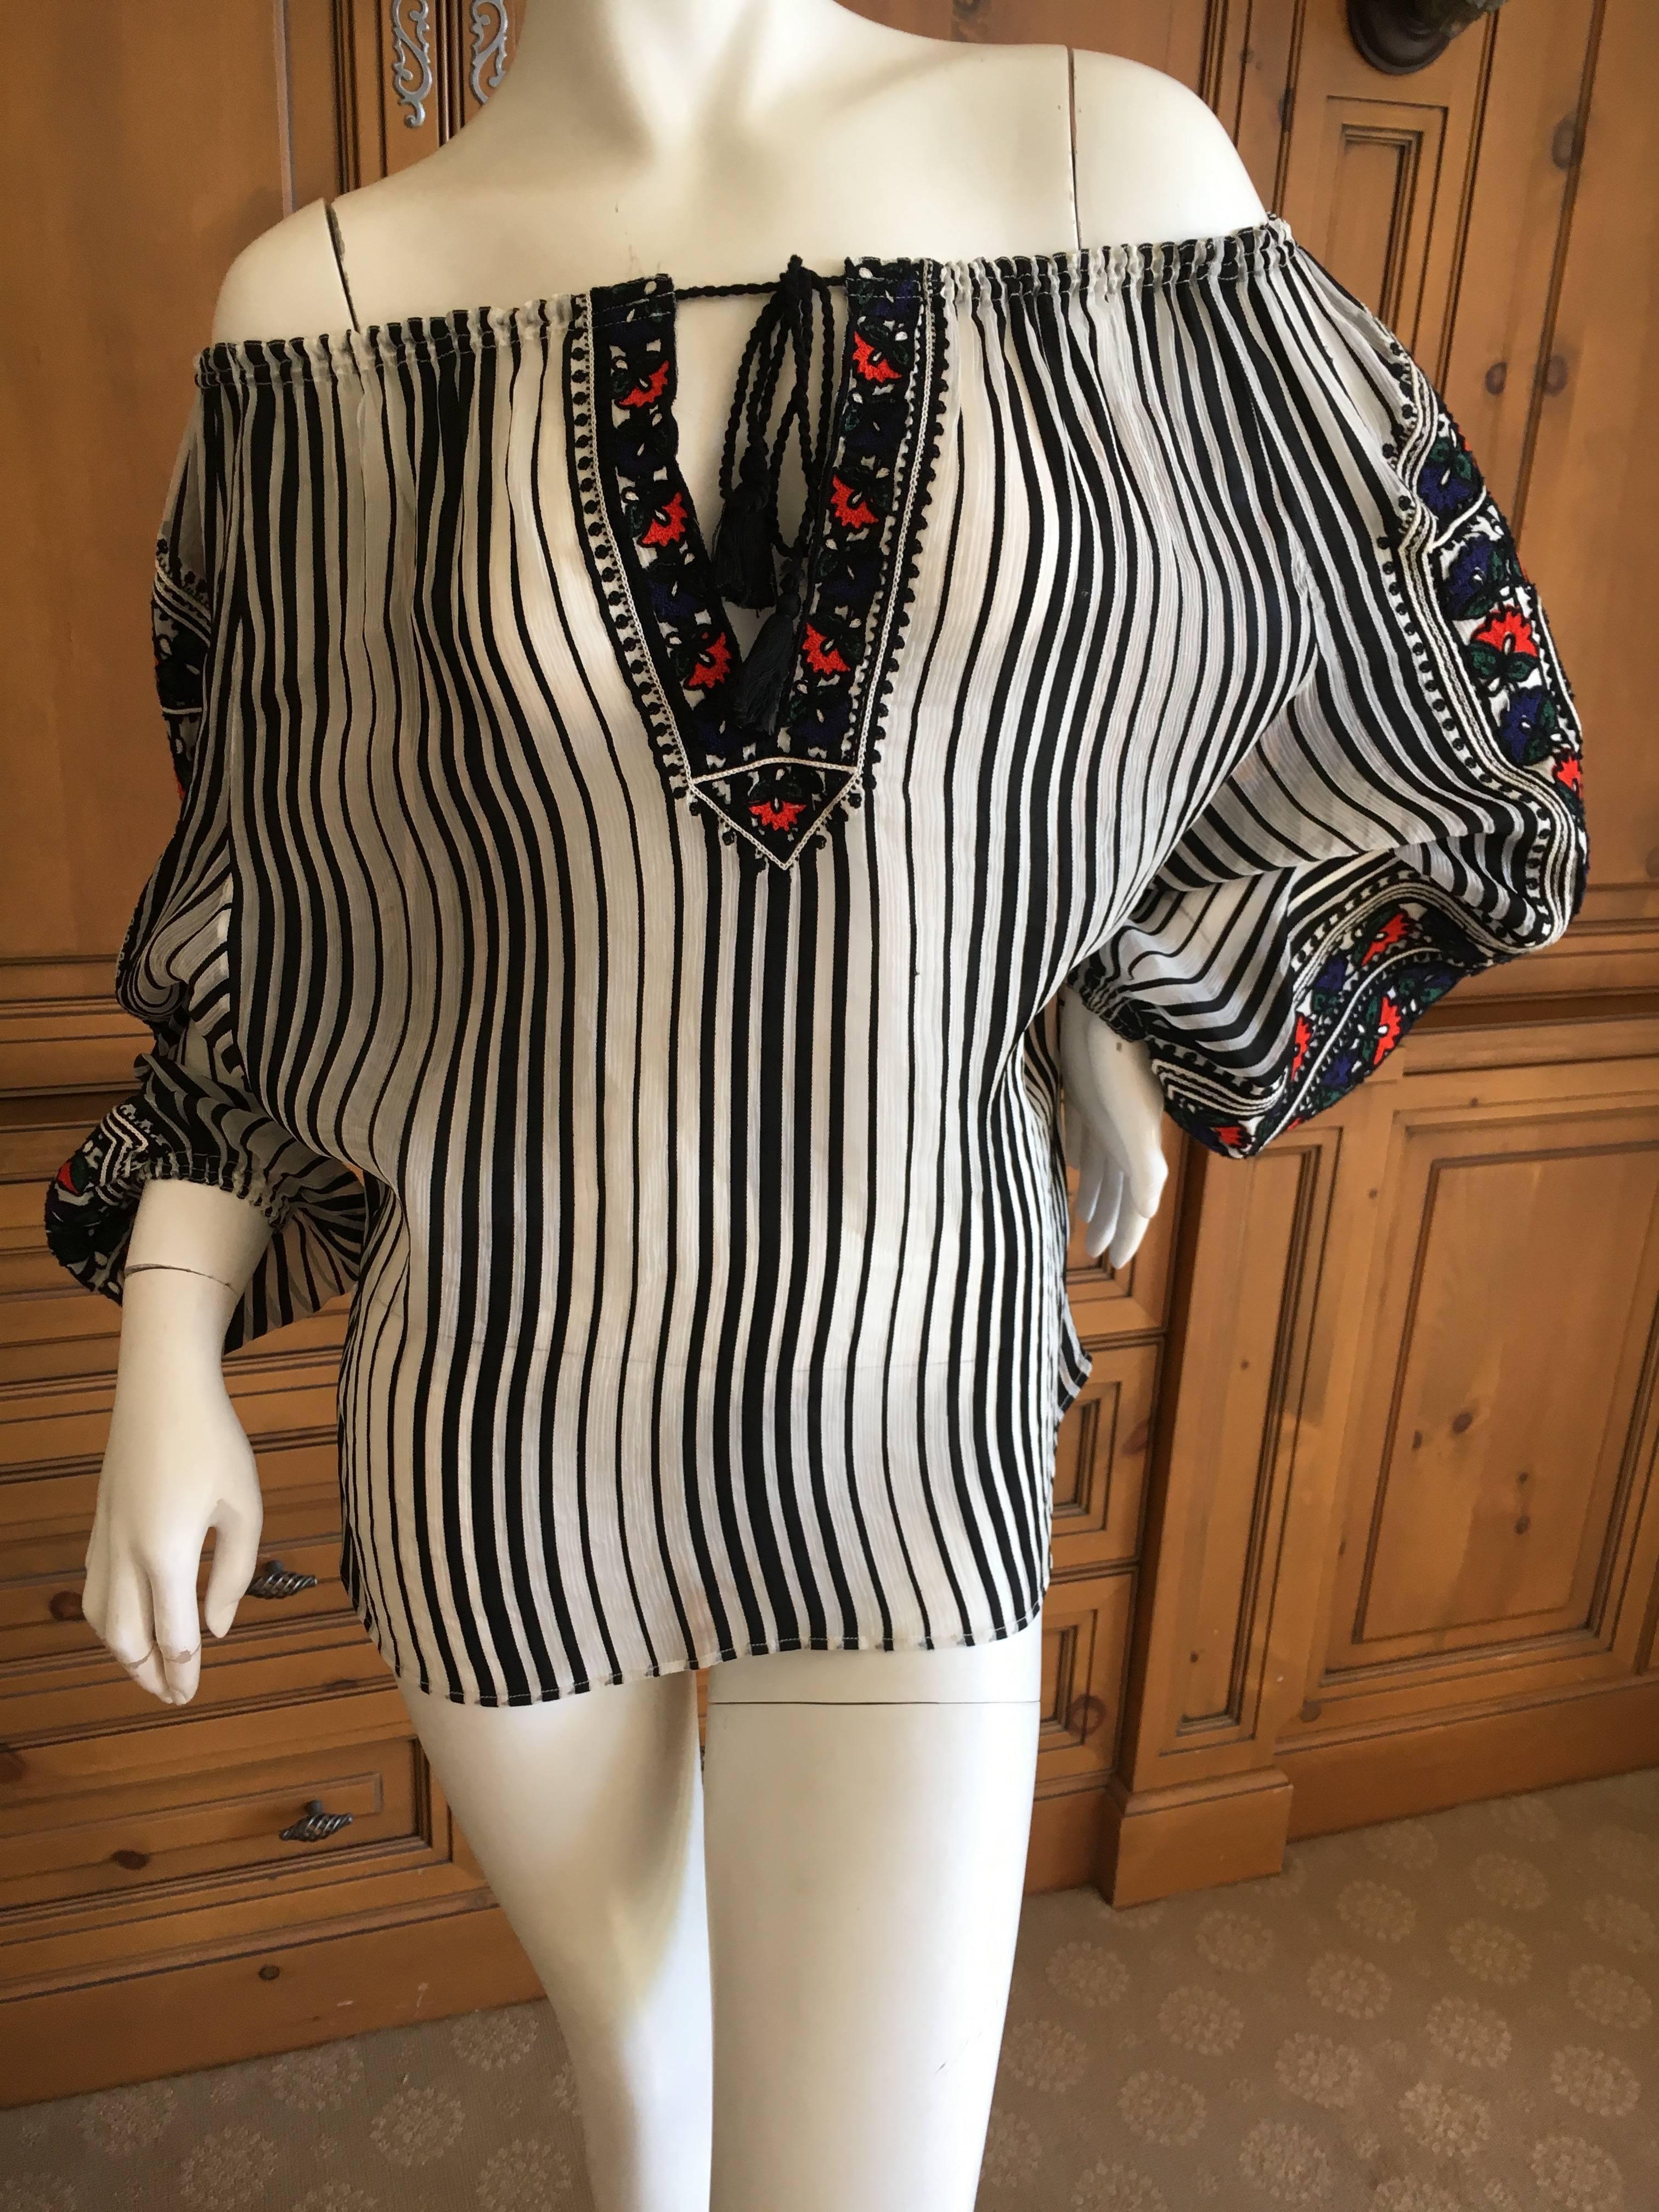 Jean Paul Gaultier Op Art Stripe off the Shoulder Top with Ethnic Style Embroideries.
Wonderful piece can be worn on or off the shoulder.